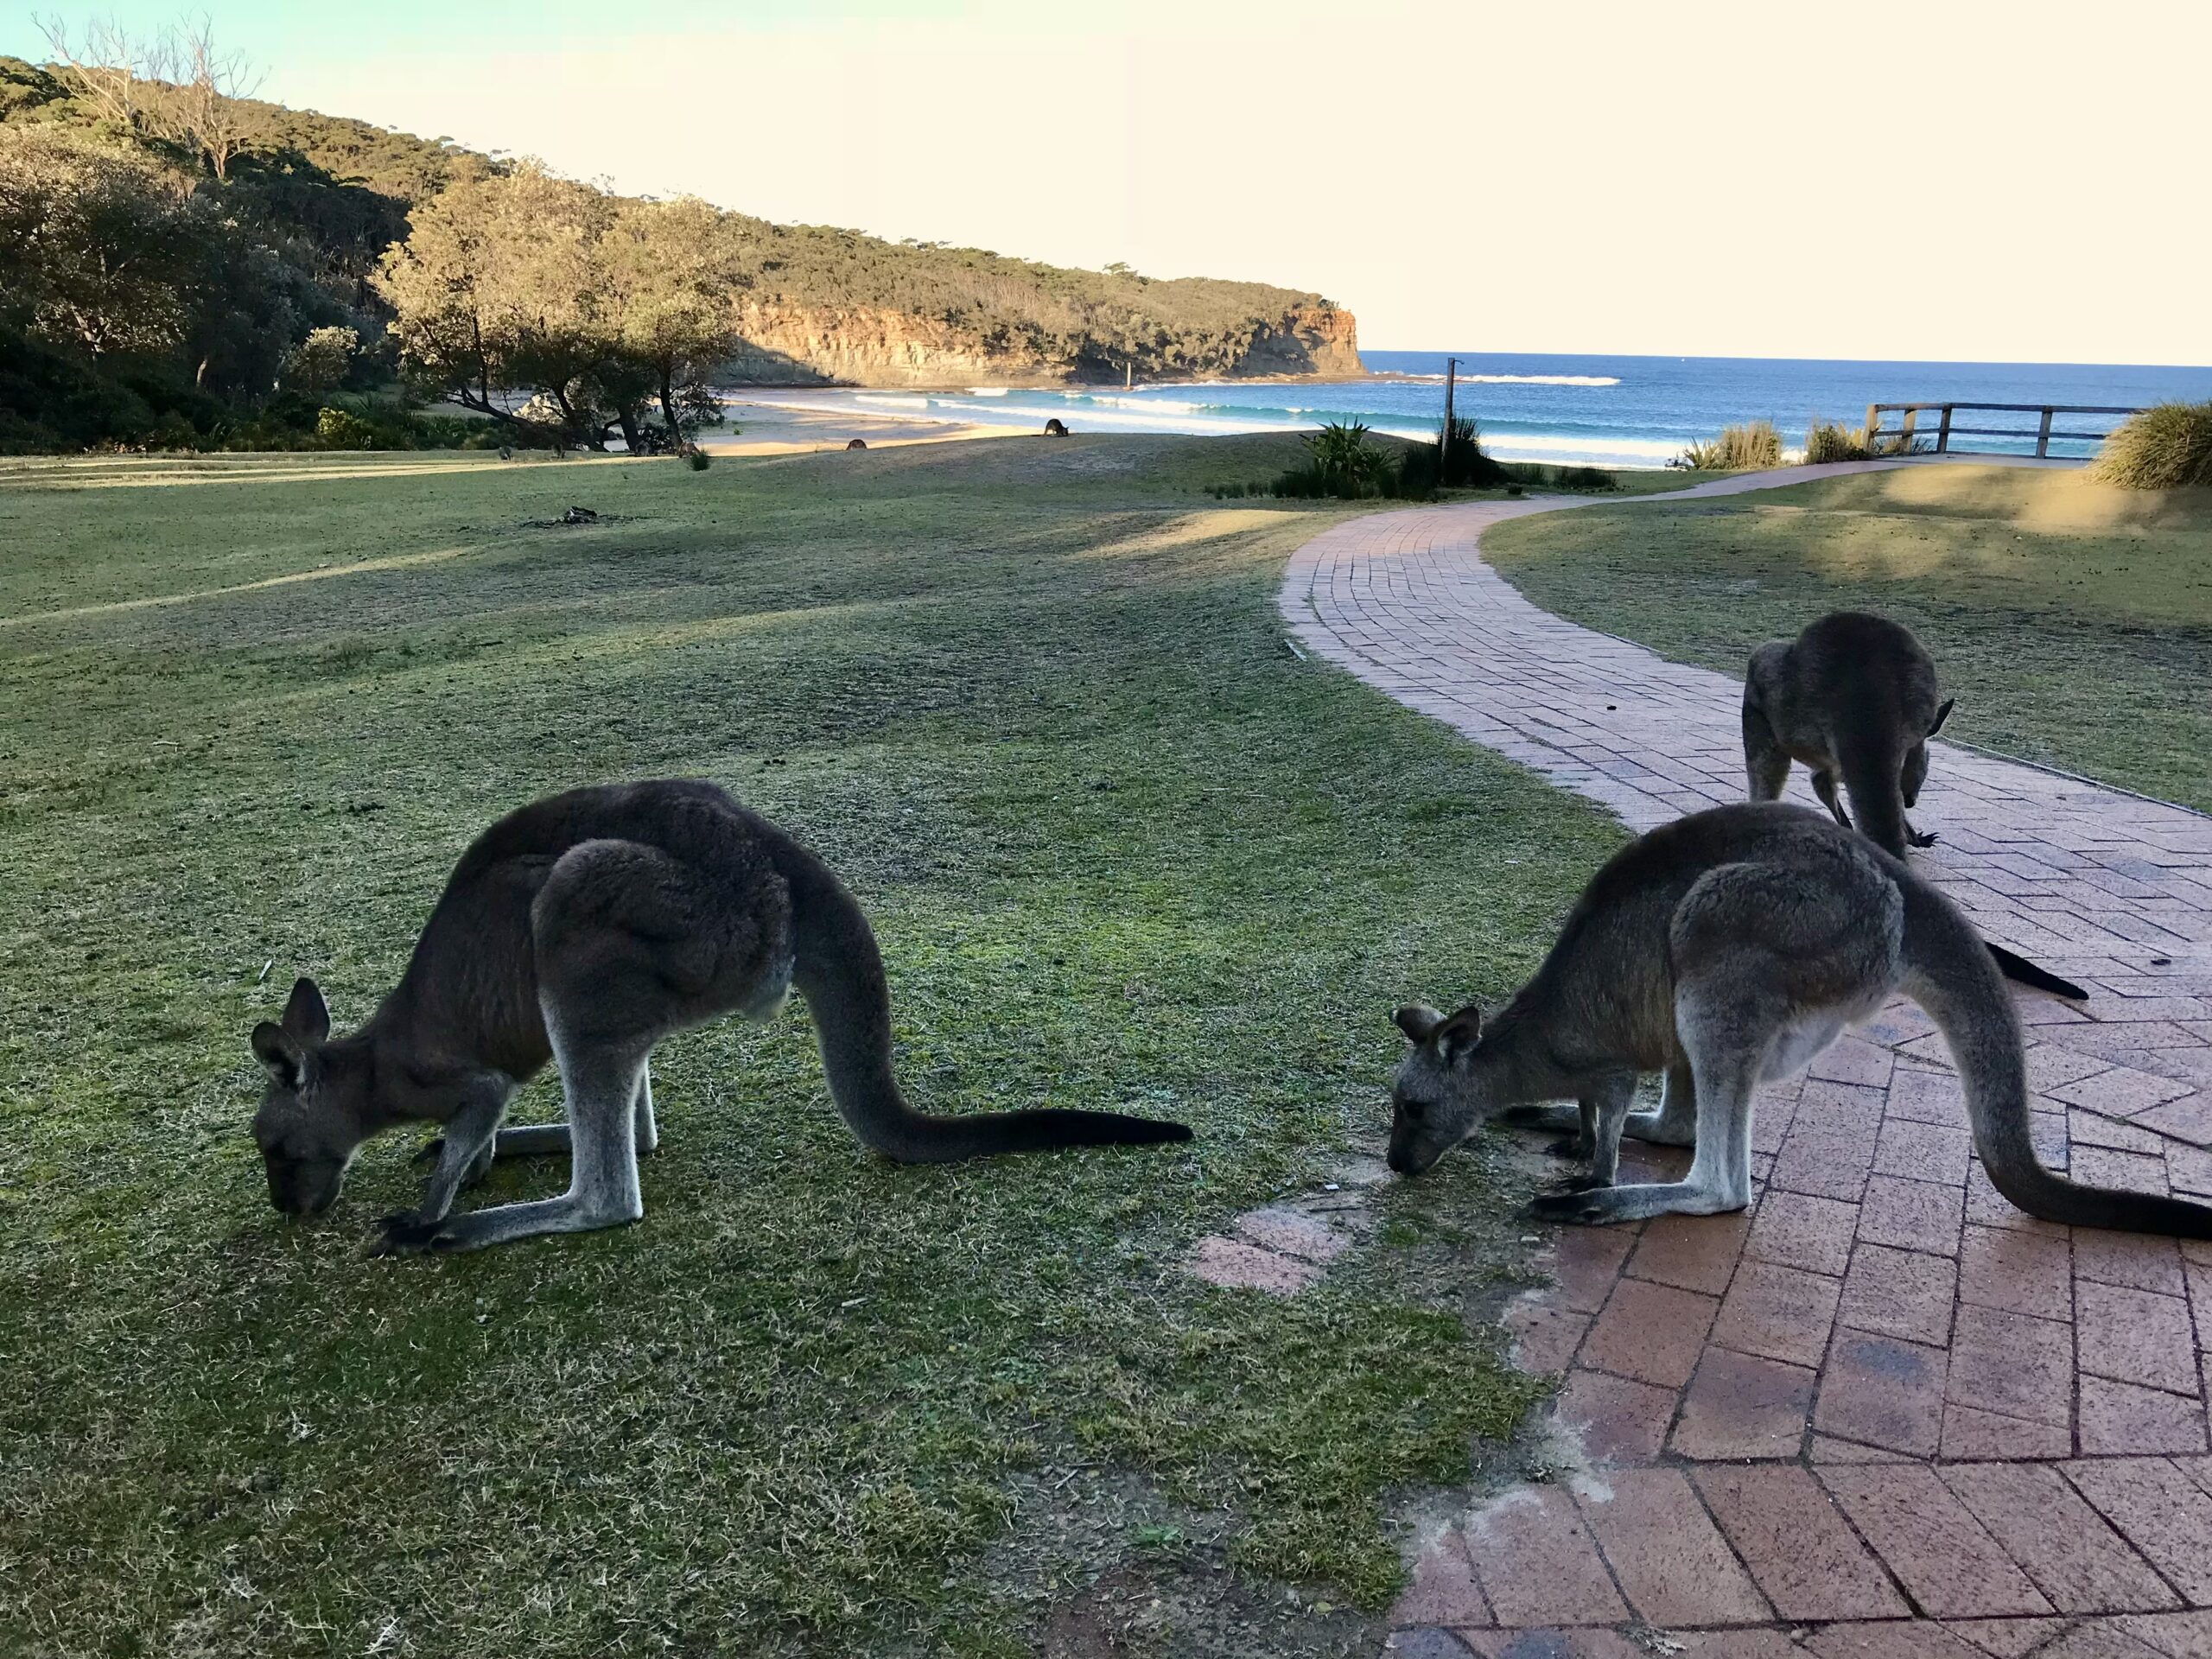 The Australia Travel Guide has all the critters you want - Kangaroos, parrots and koalas.